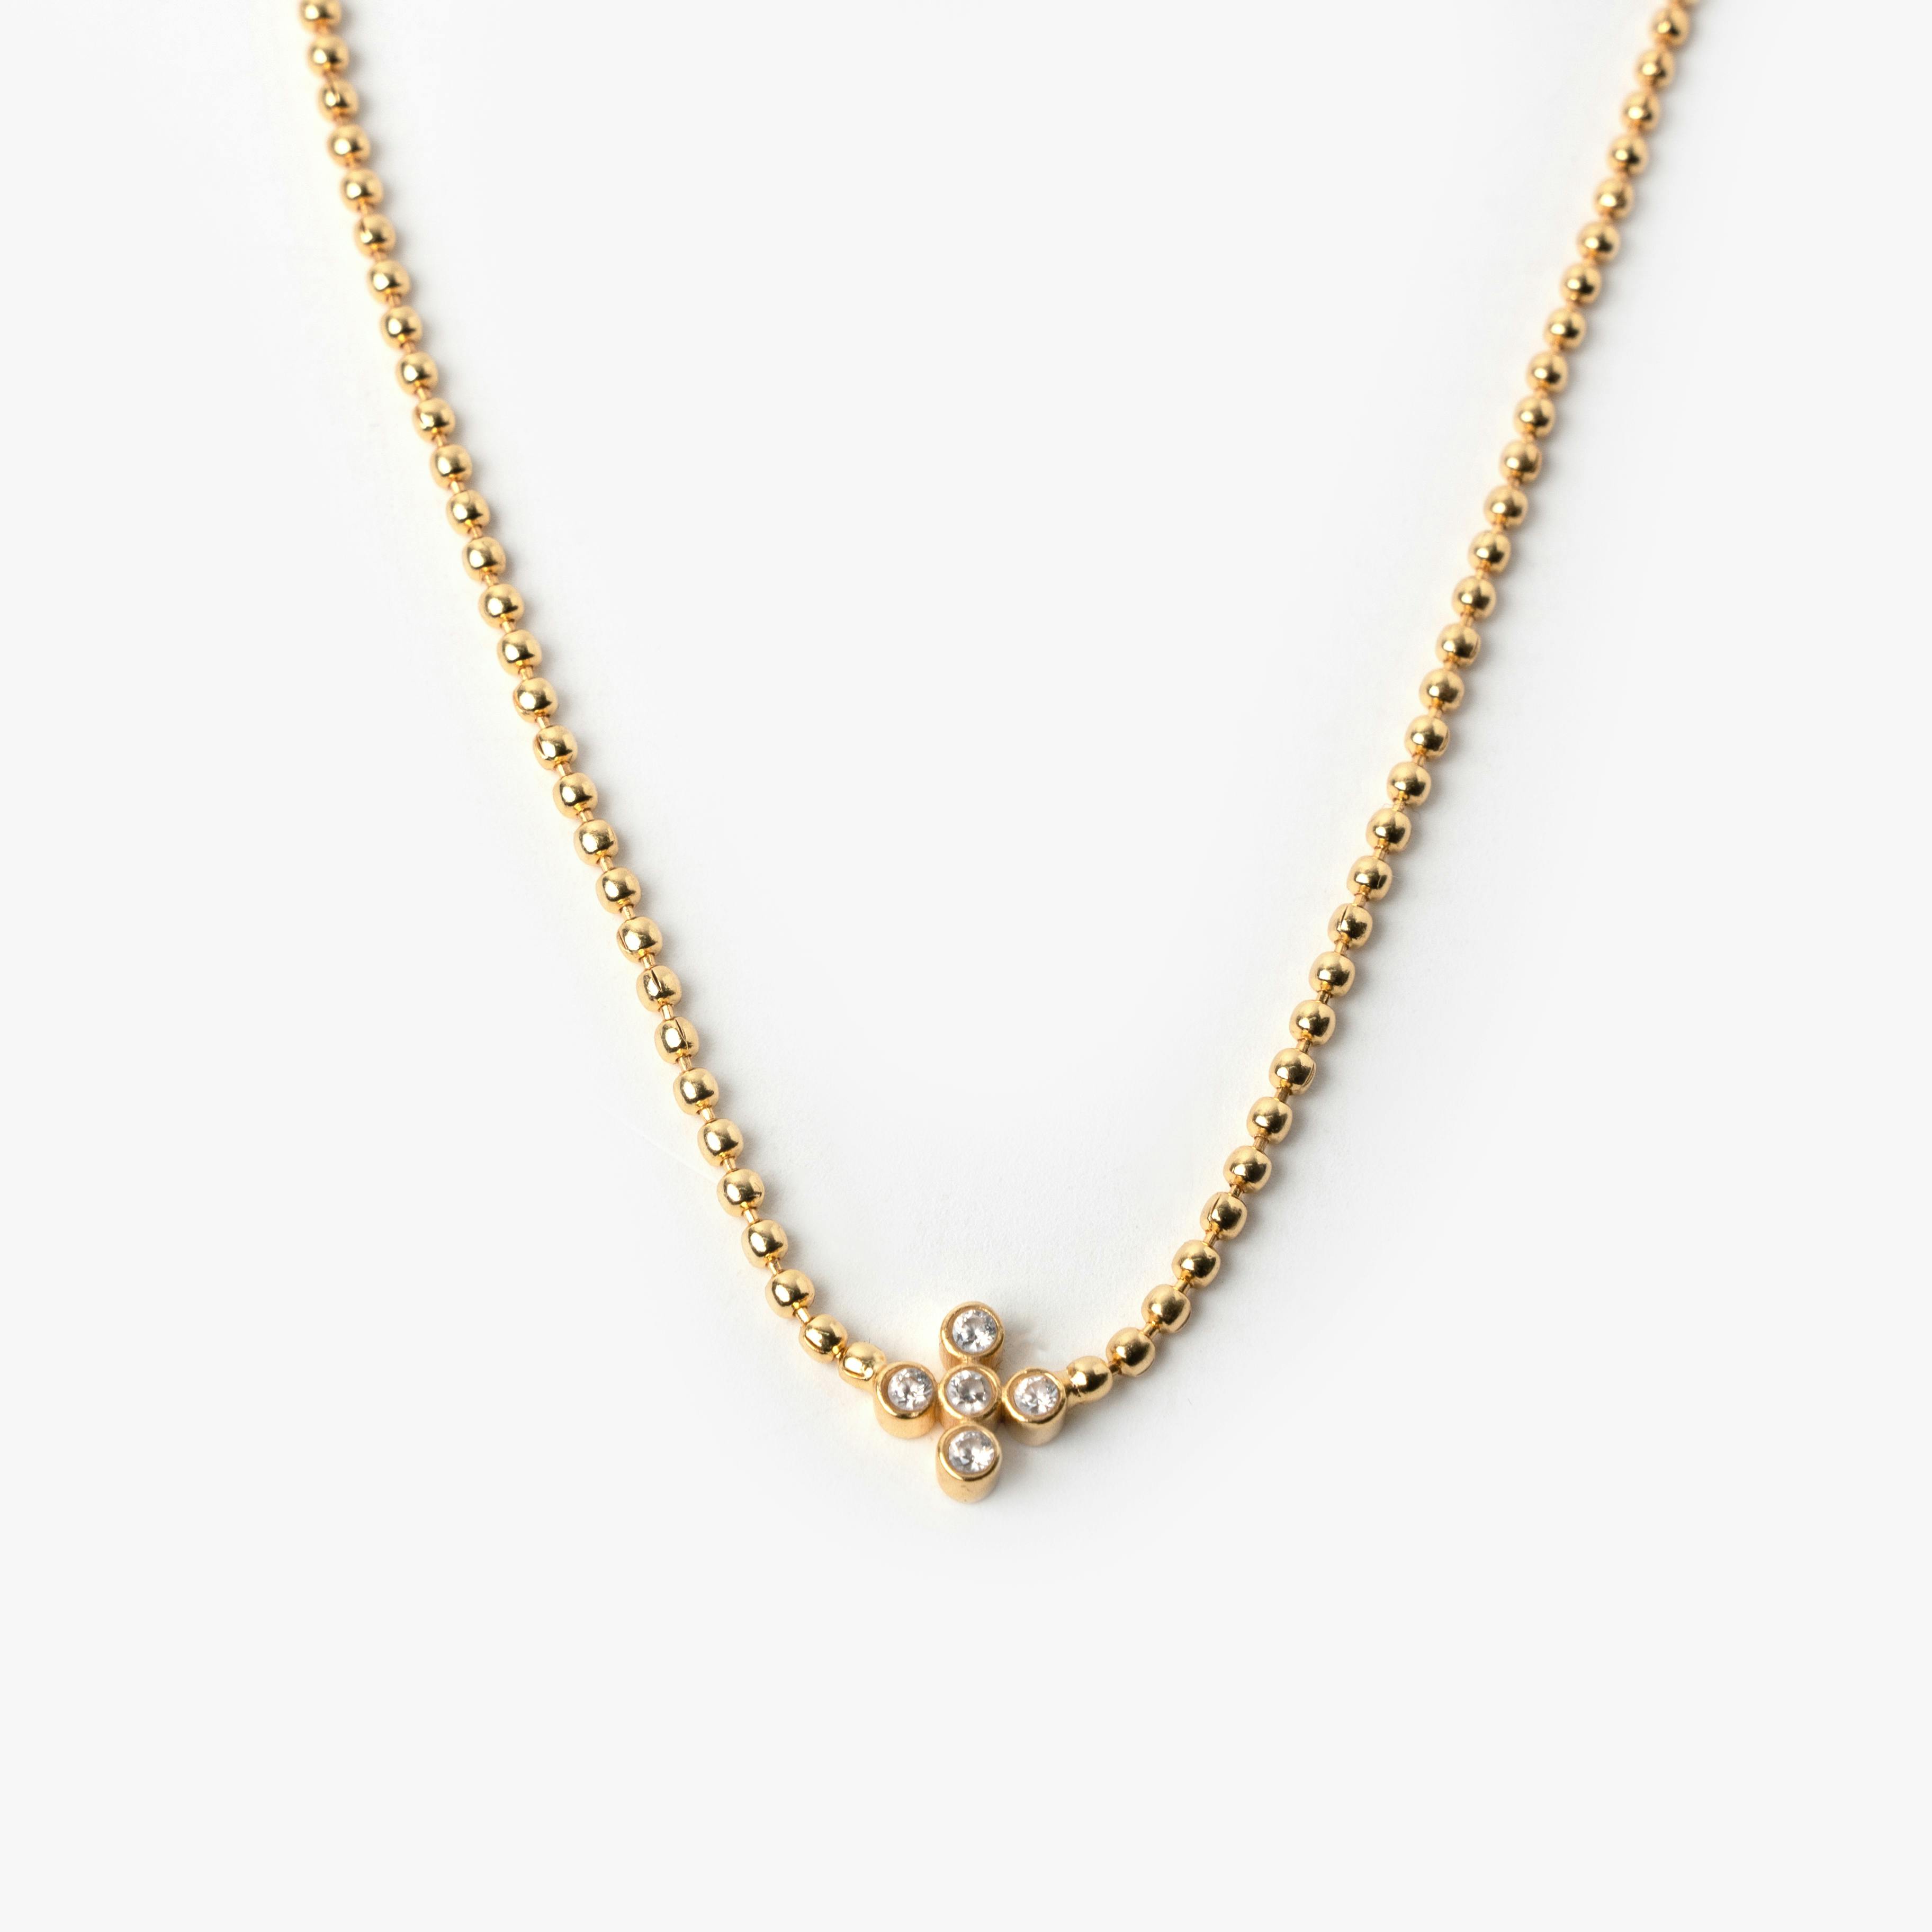 SIRIUS STAR NECKLACE GOLD TONE , a product by Equiivalence